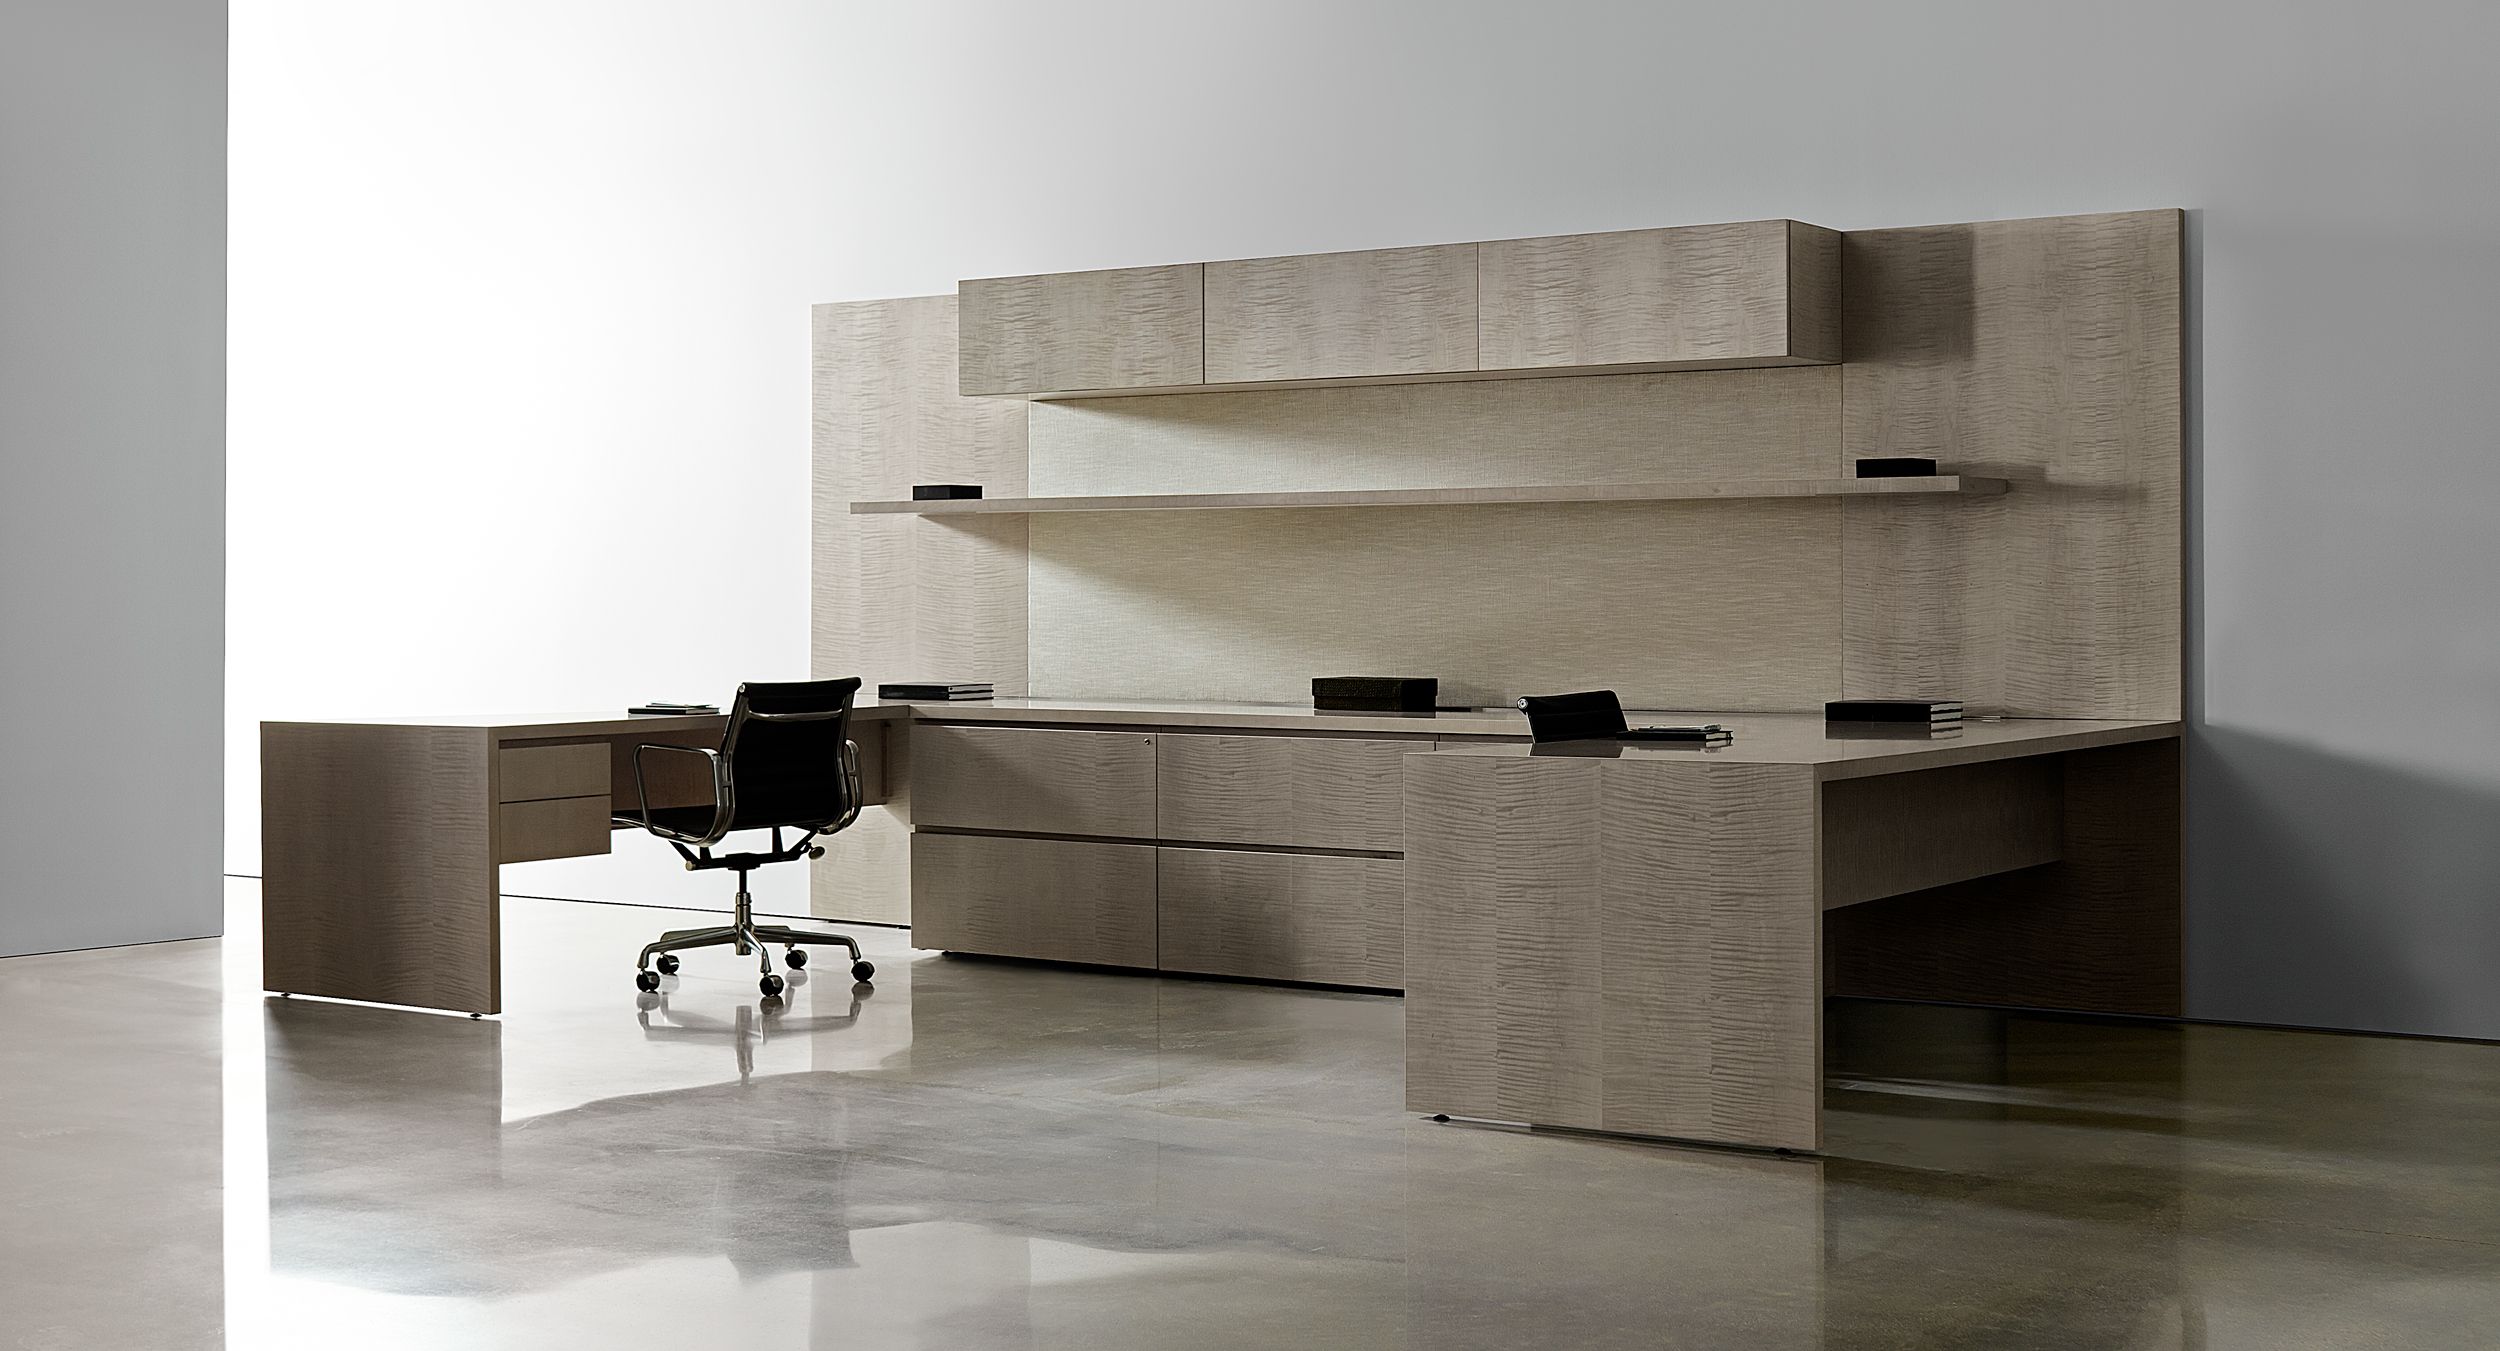 New Millennia features continuous open shelving, minimalist closed storage, and desking with raised storage and mitered joinery.